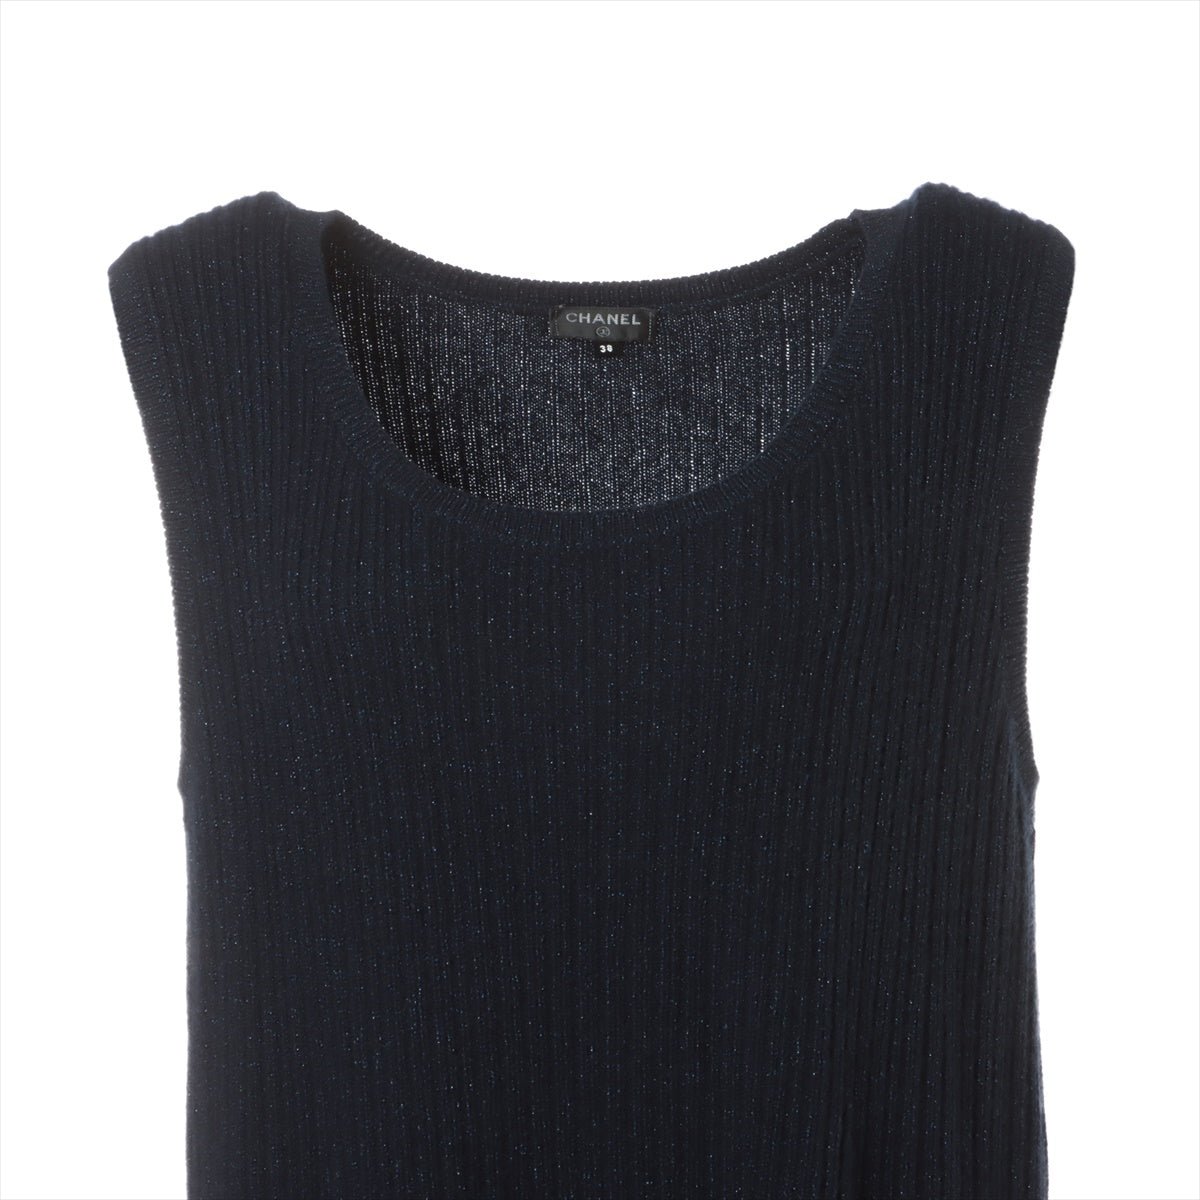 Chanel Coco Mark P58 Cashmere x polyester Knit dress 38 Ladies' Navy Blue  Sleeveless